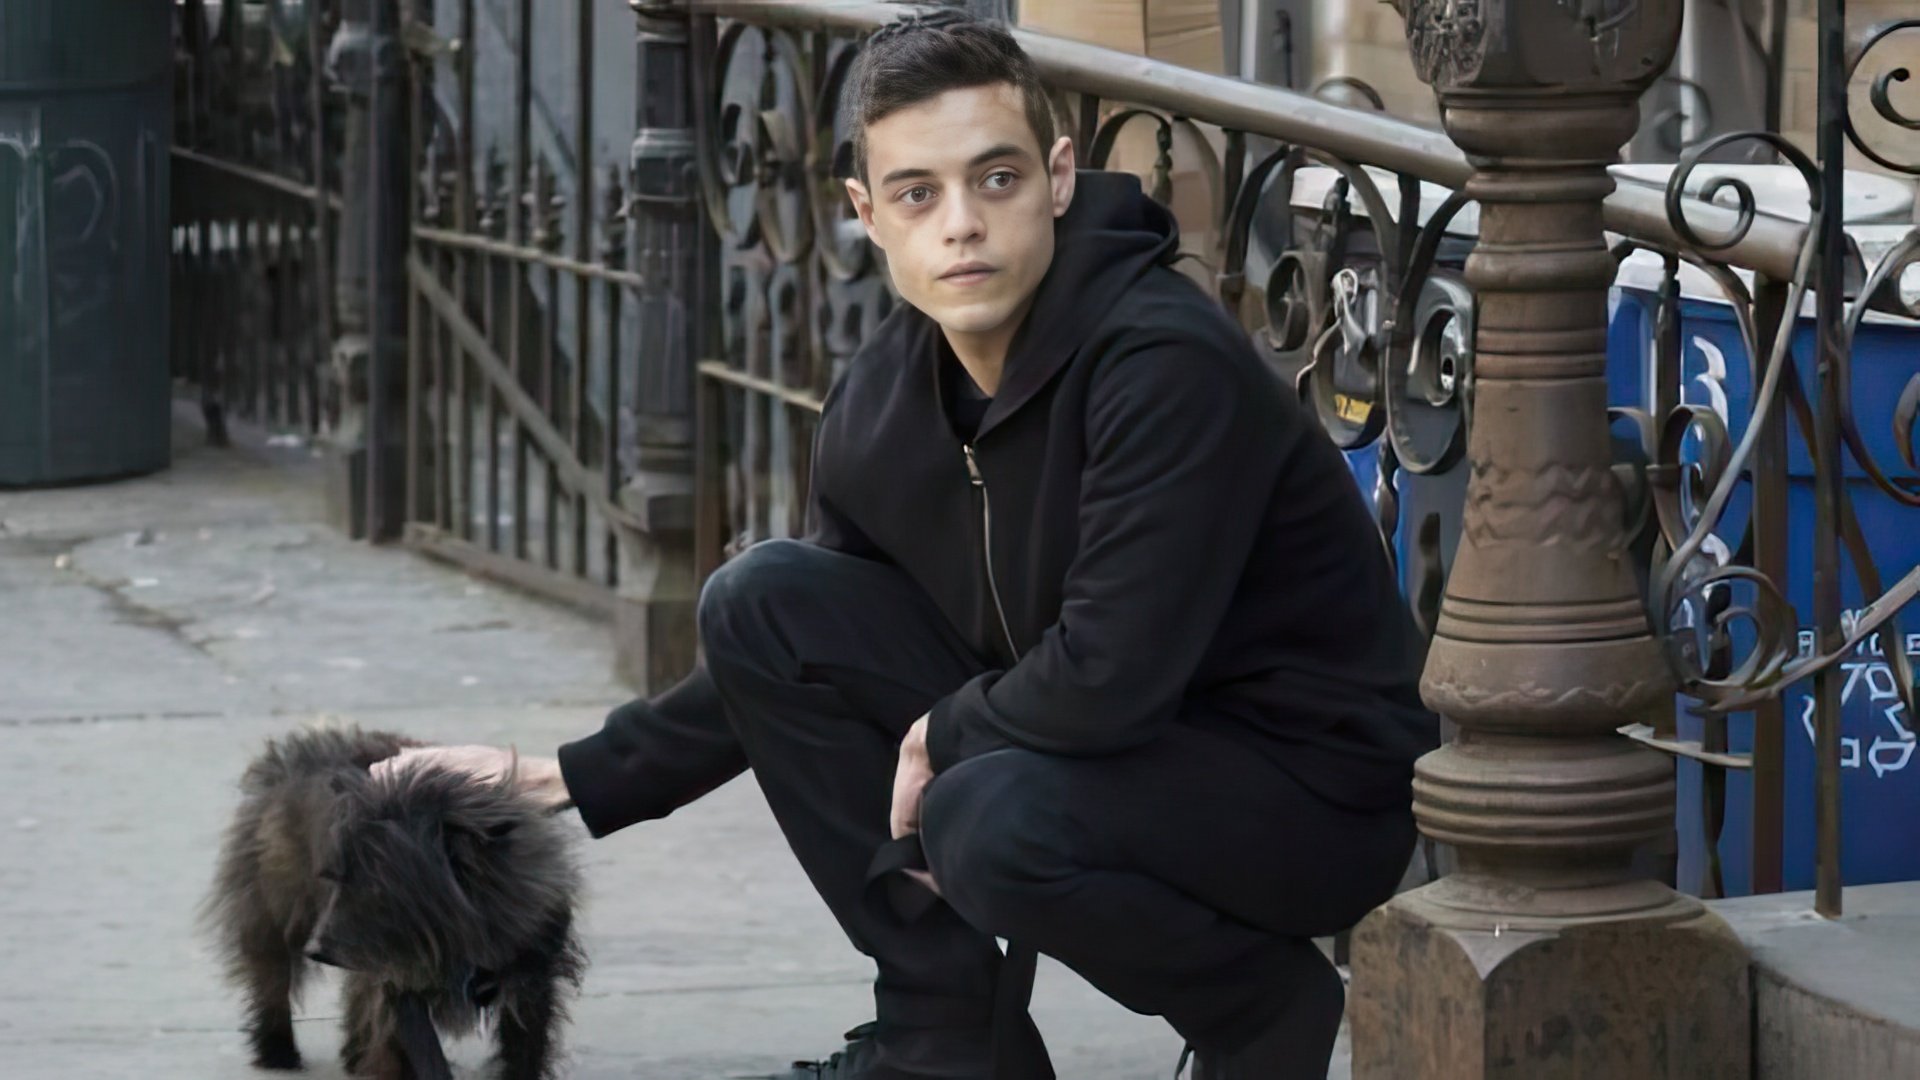 In the series 'Mr. Robot', Rami Malek played the lead role